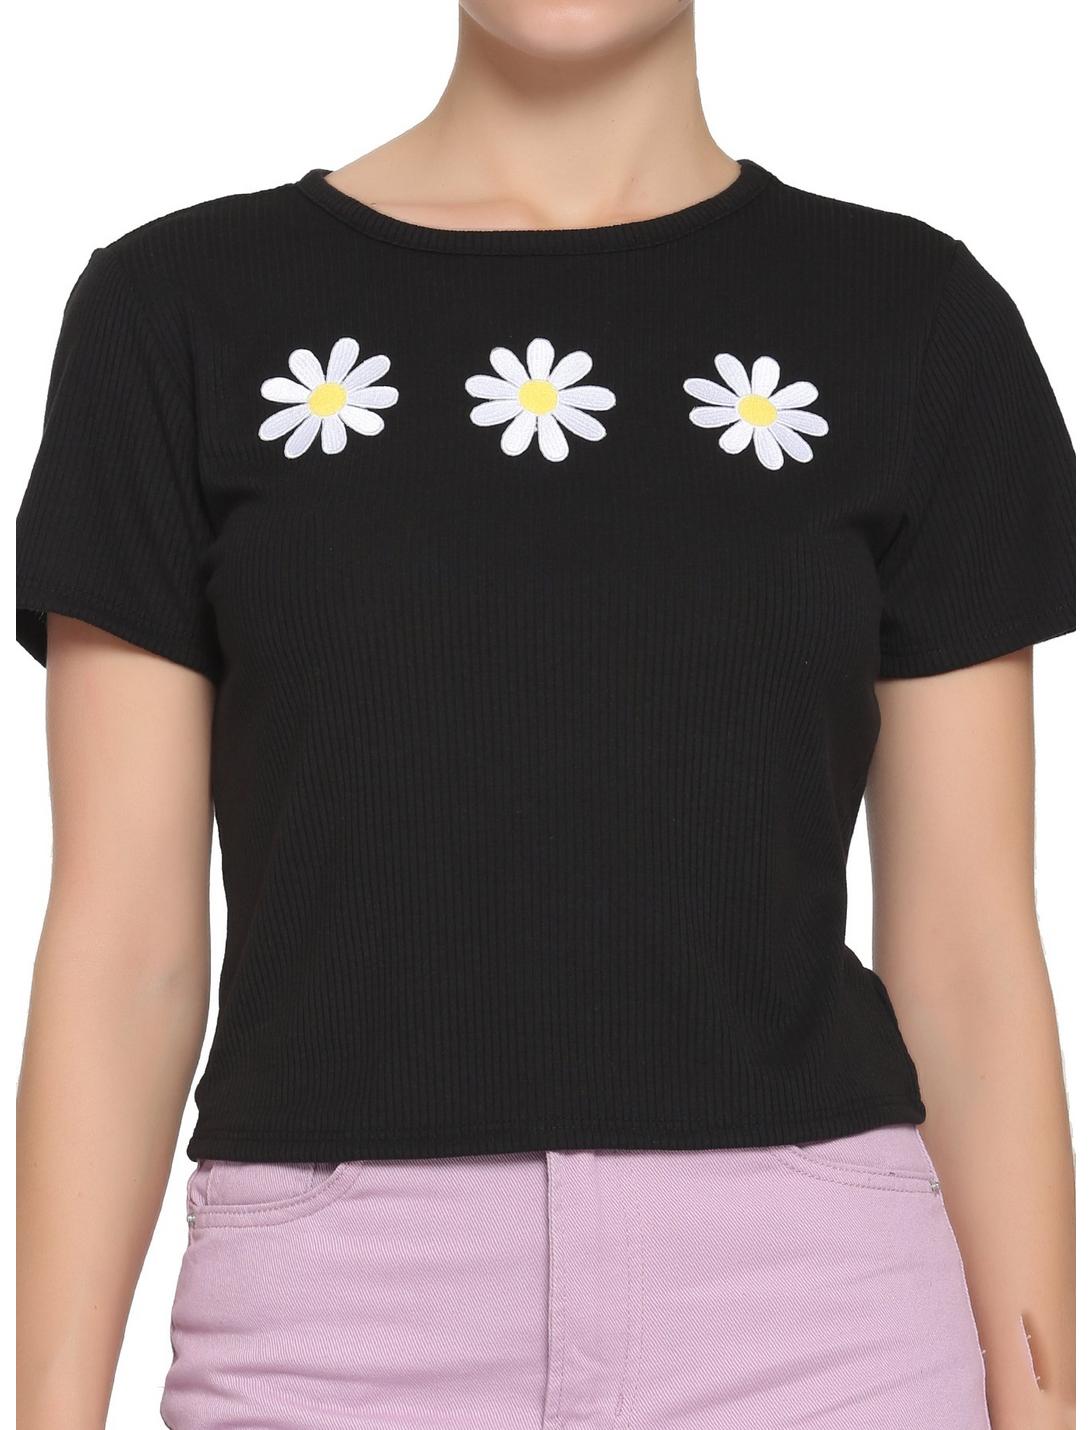 Embroidered Daisy Girls Crop Baby T-Shirt, BLACK, hi-res